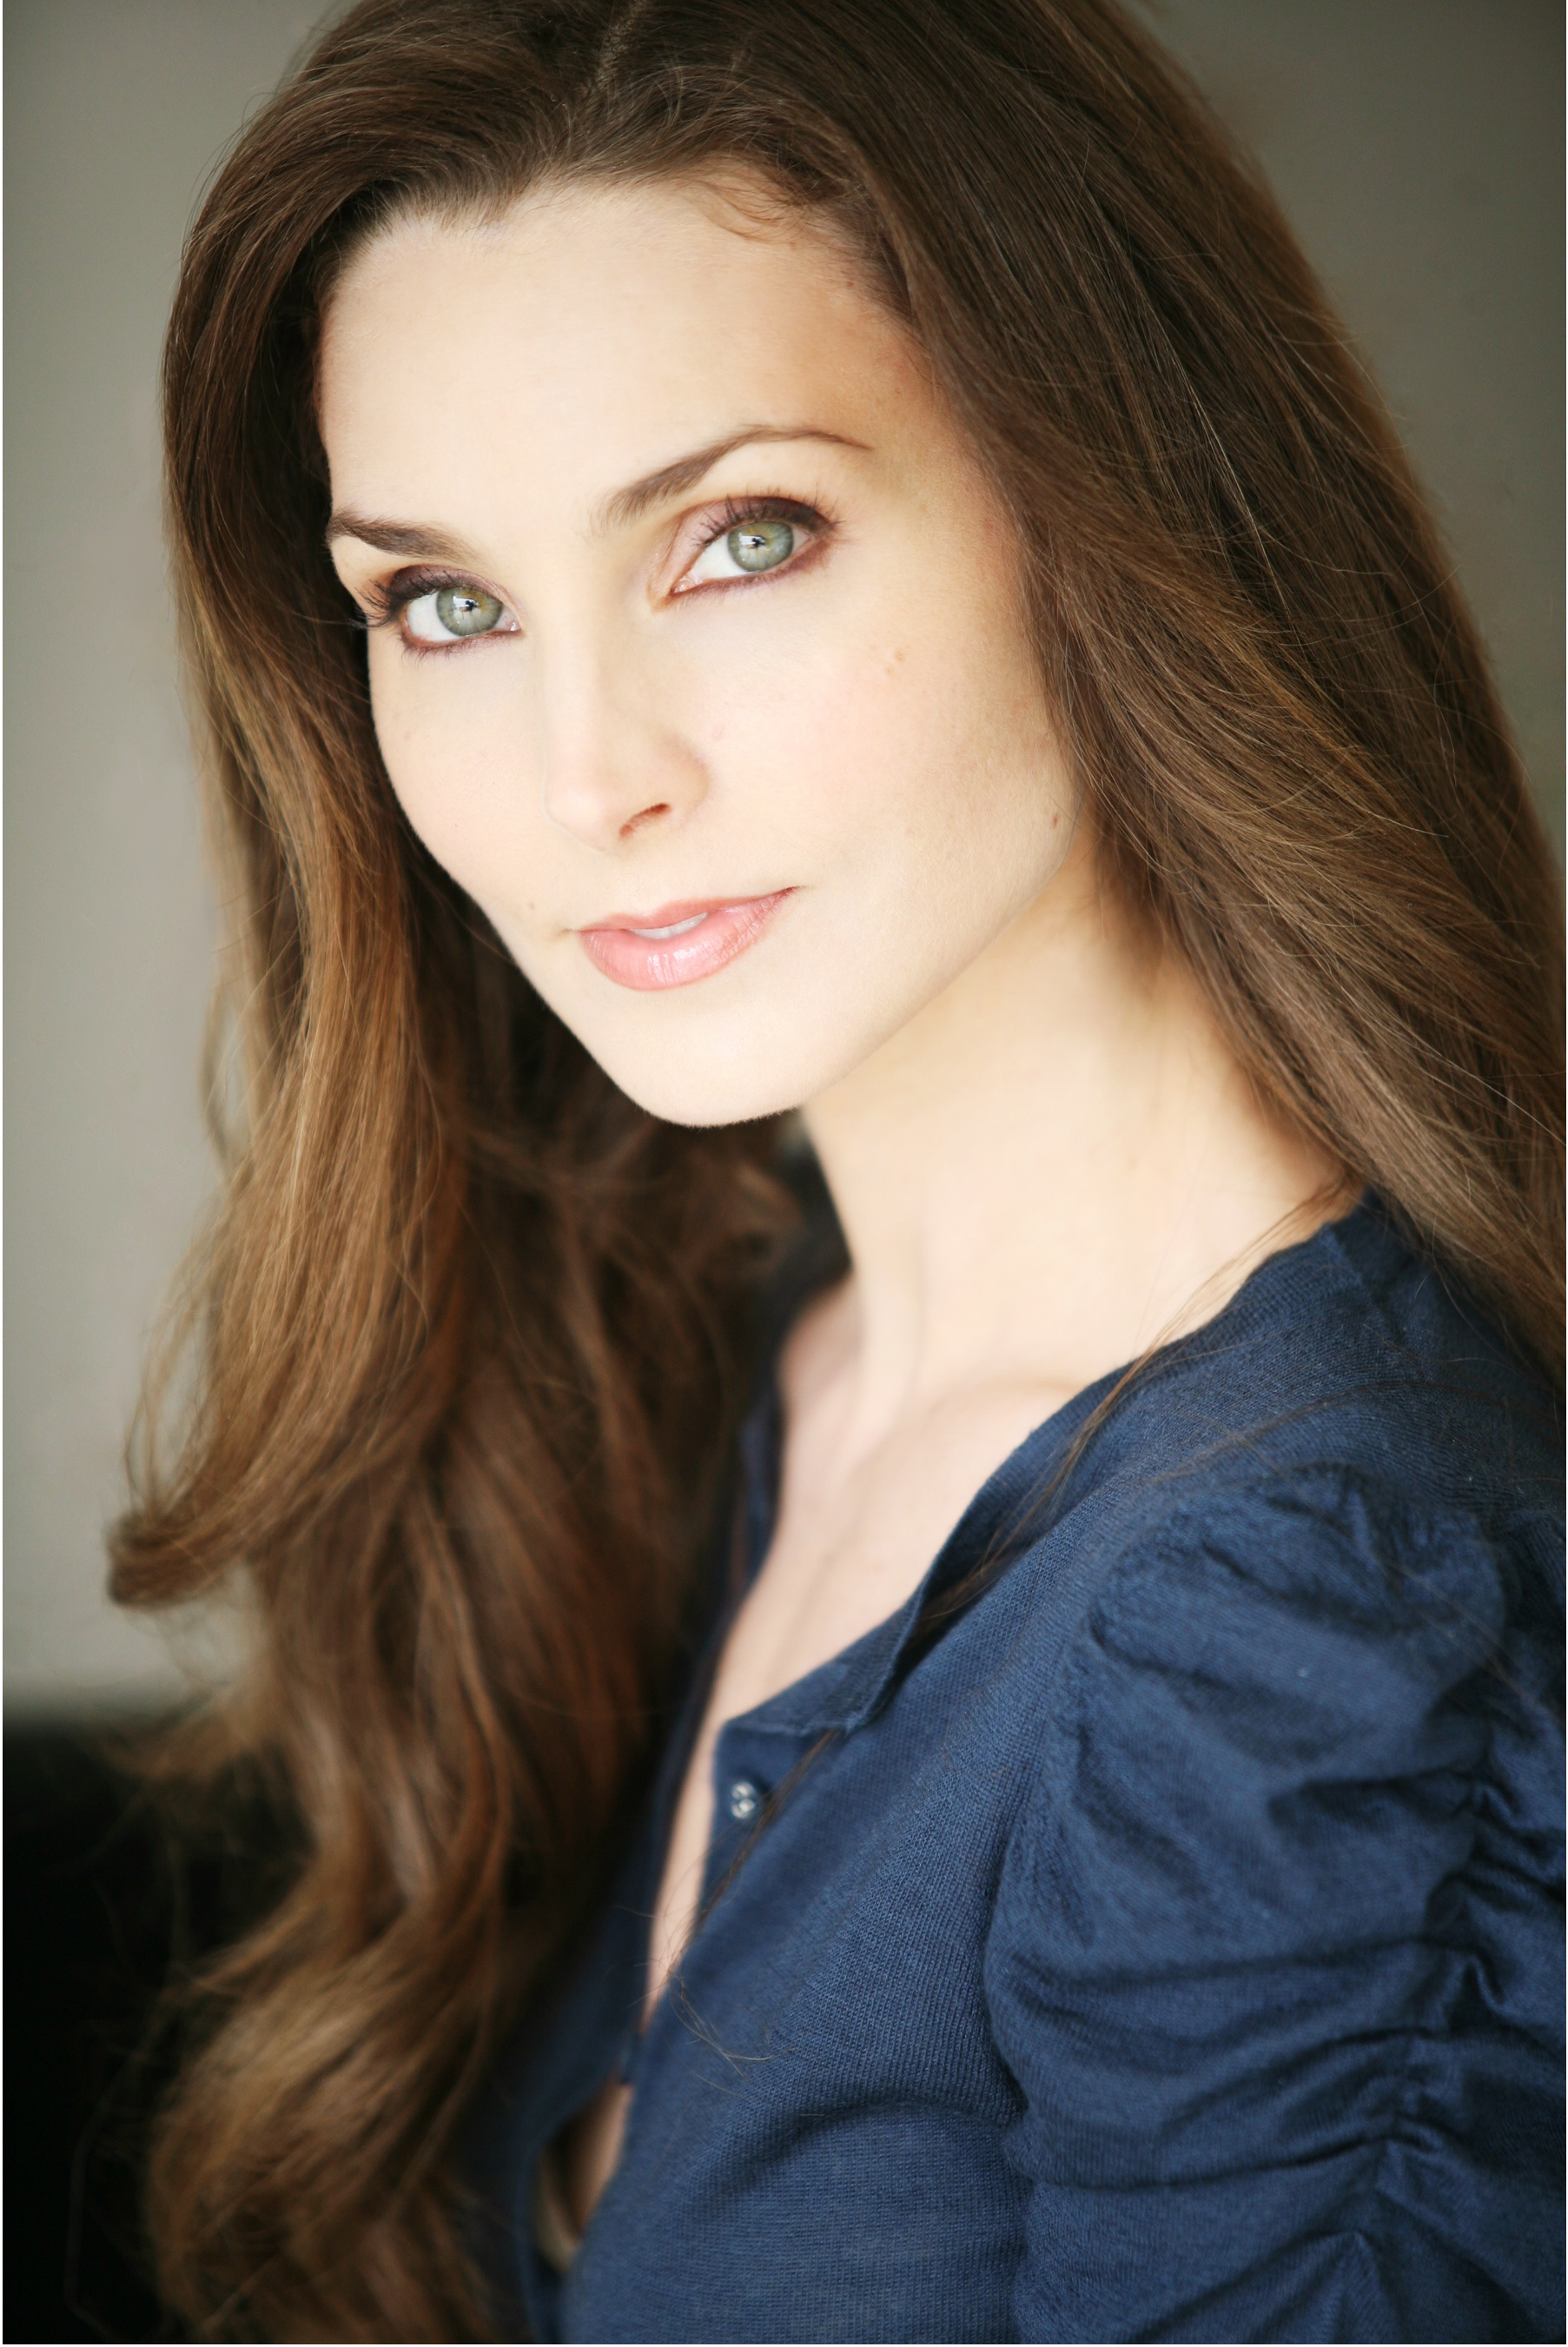 Pictures of Alicia Minshew - Pictures Of Celebrities1805 x 2701